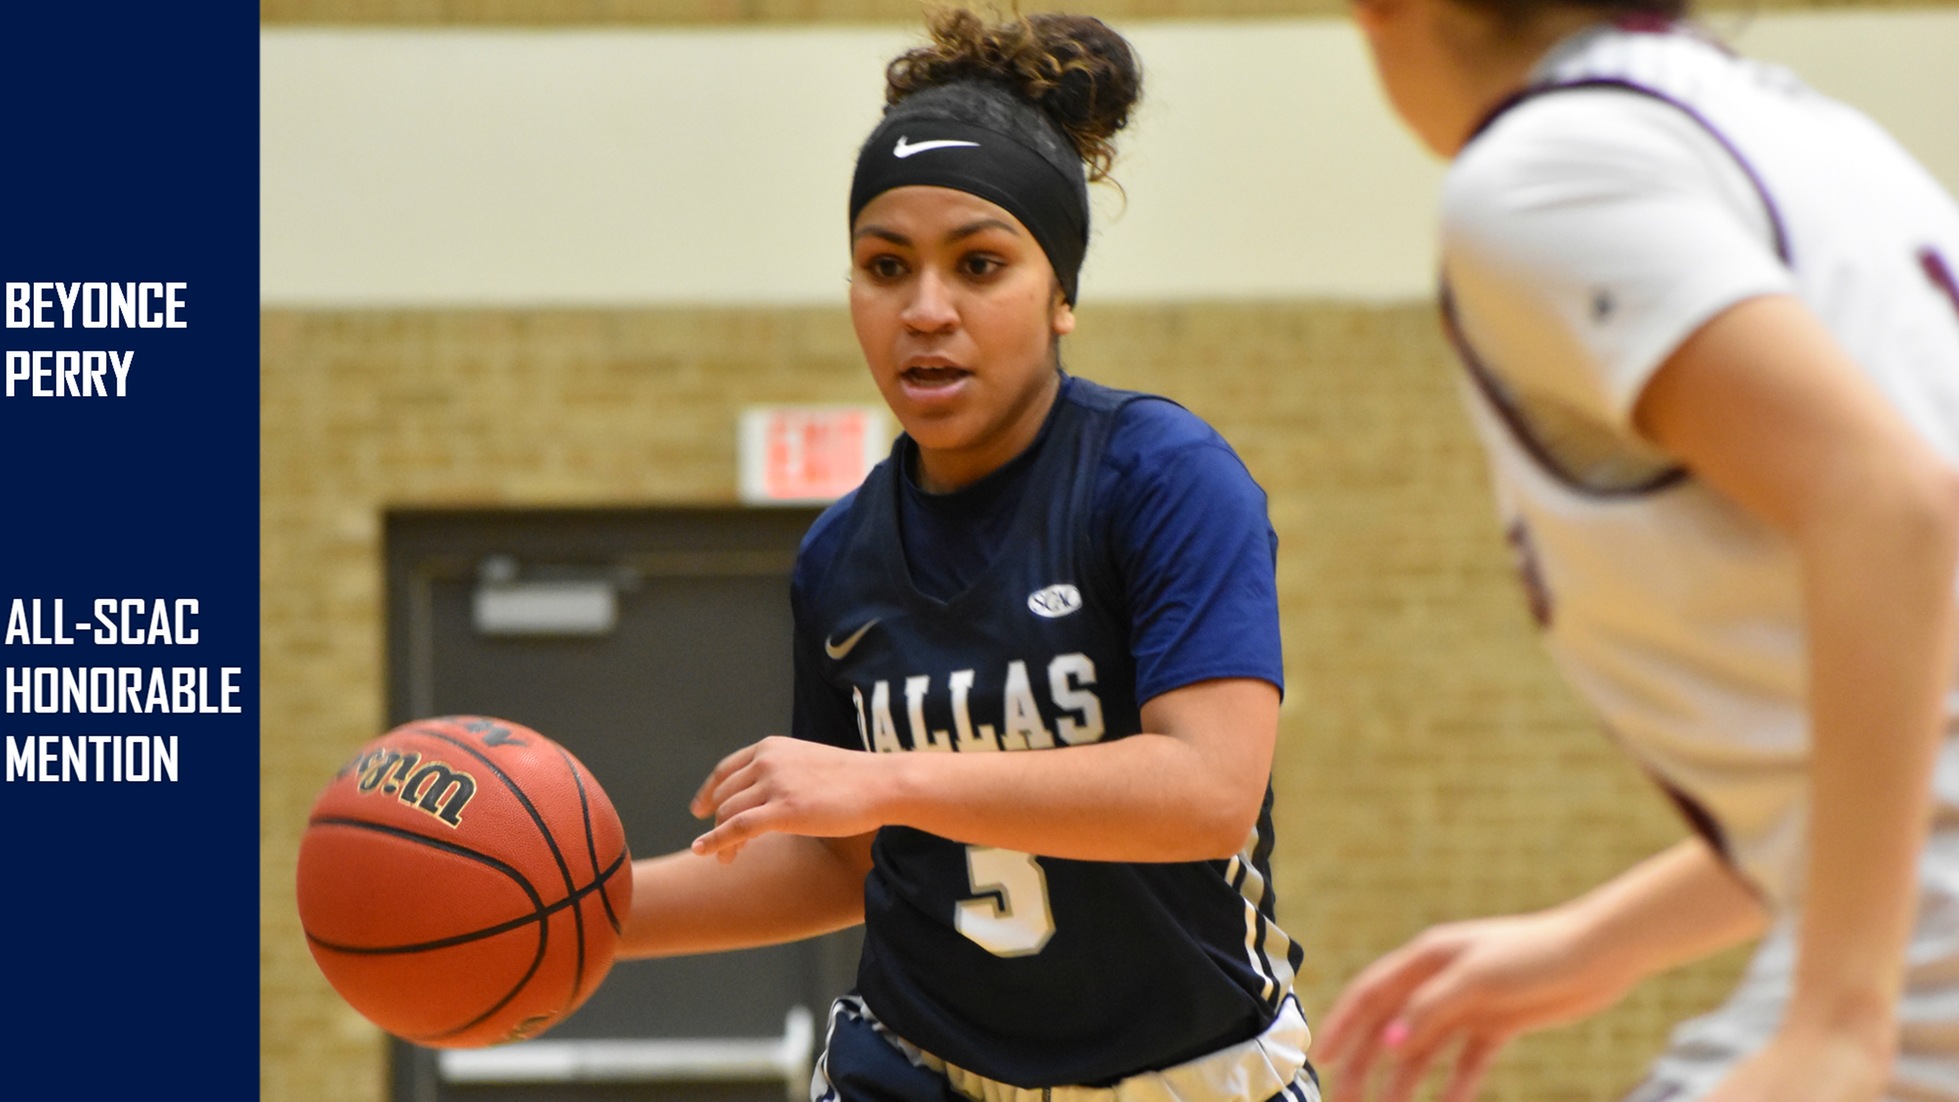 Perry represents UD Women's Basketball with All-SCAC Honorable Mention Selection